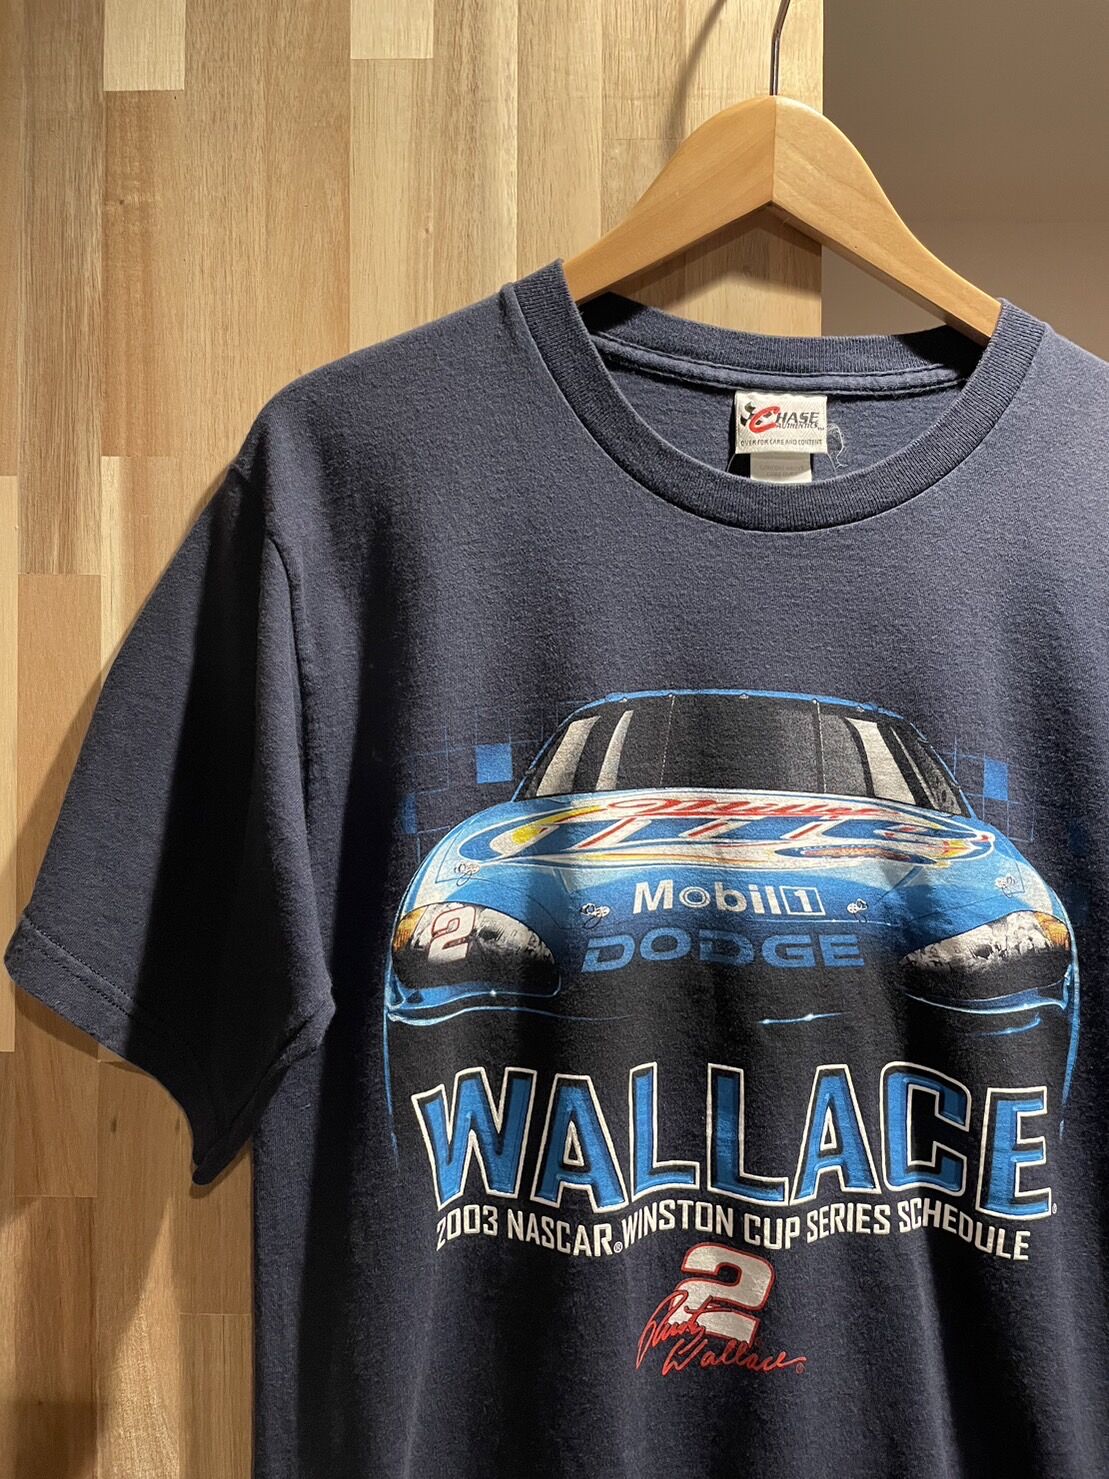 00s CHASE AUTHENTIC NASCAR レーシング 両面プリント 半袖 Tシャツ...